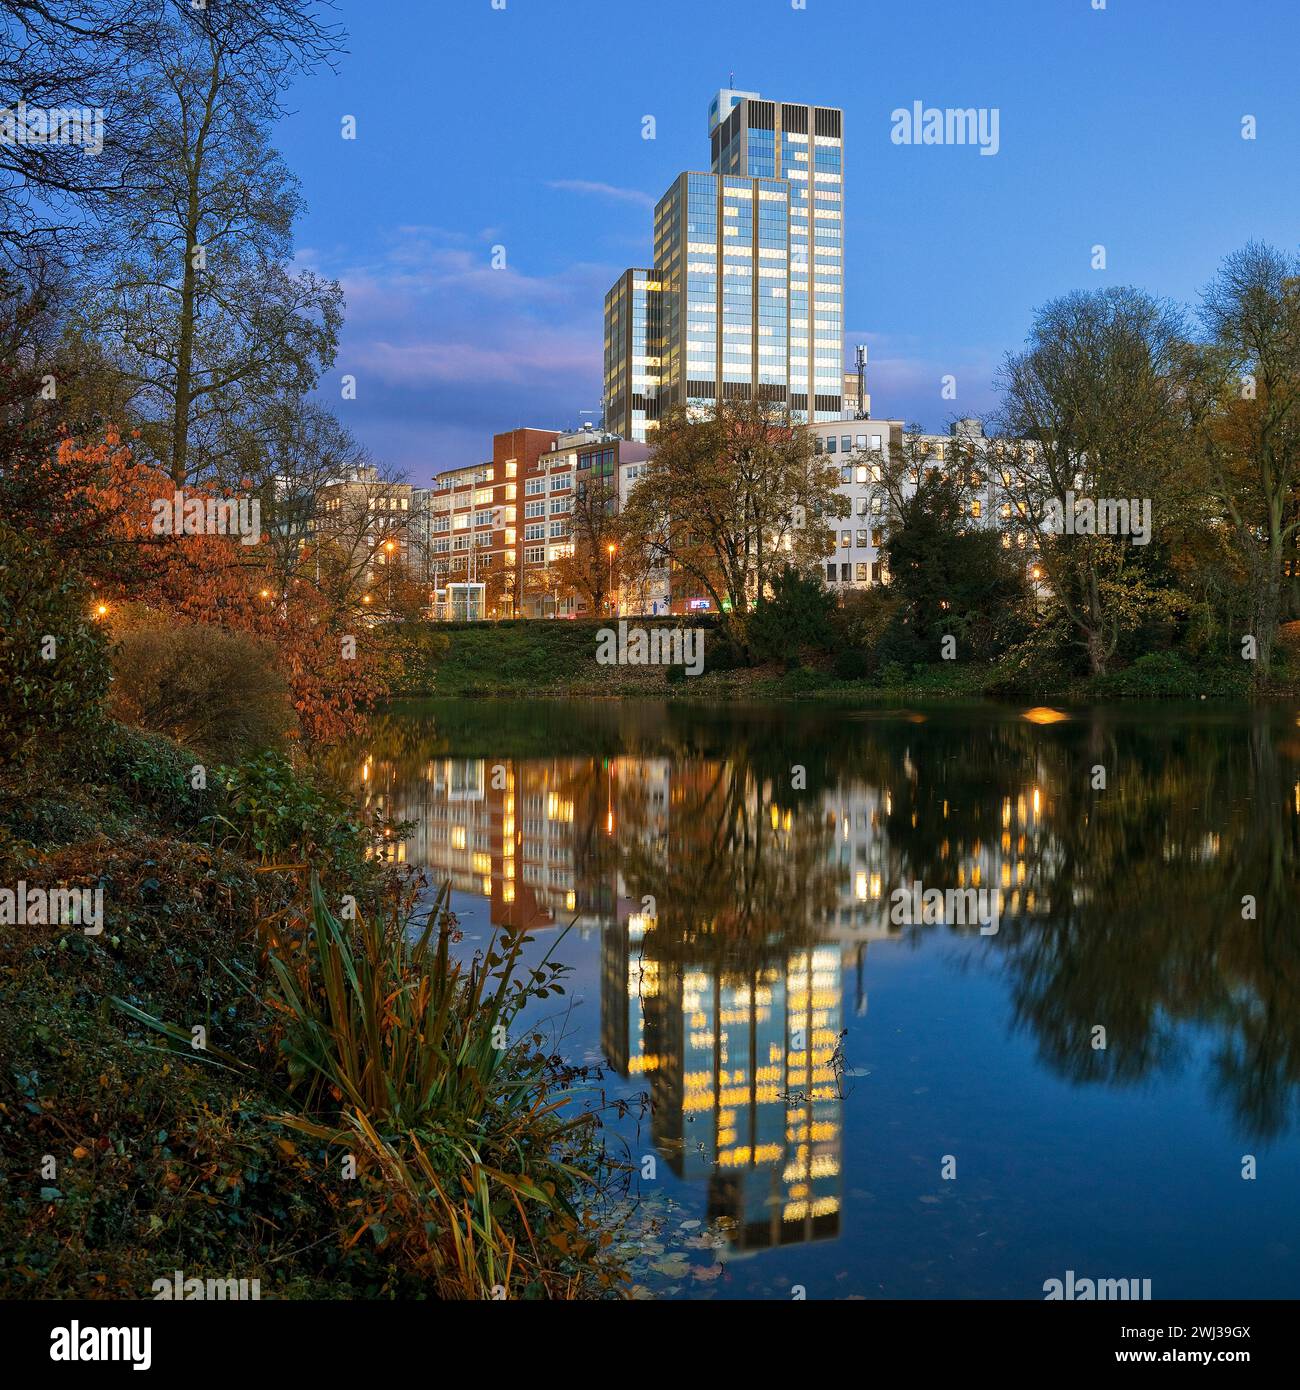 The LVA main building at the Kaiserteich in the autumn in the evening, Duesseldorf, Germany, Europe Stock Photo